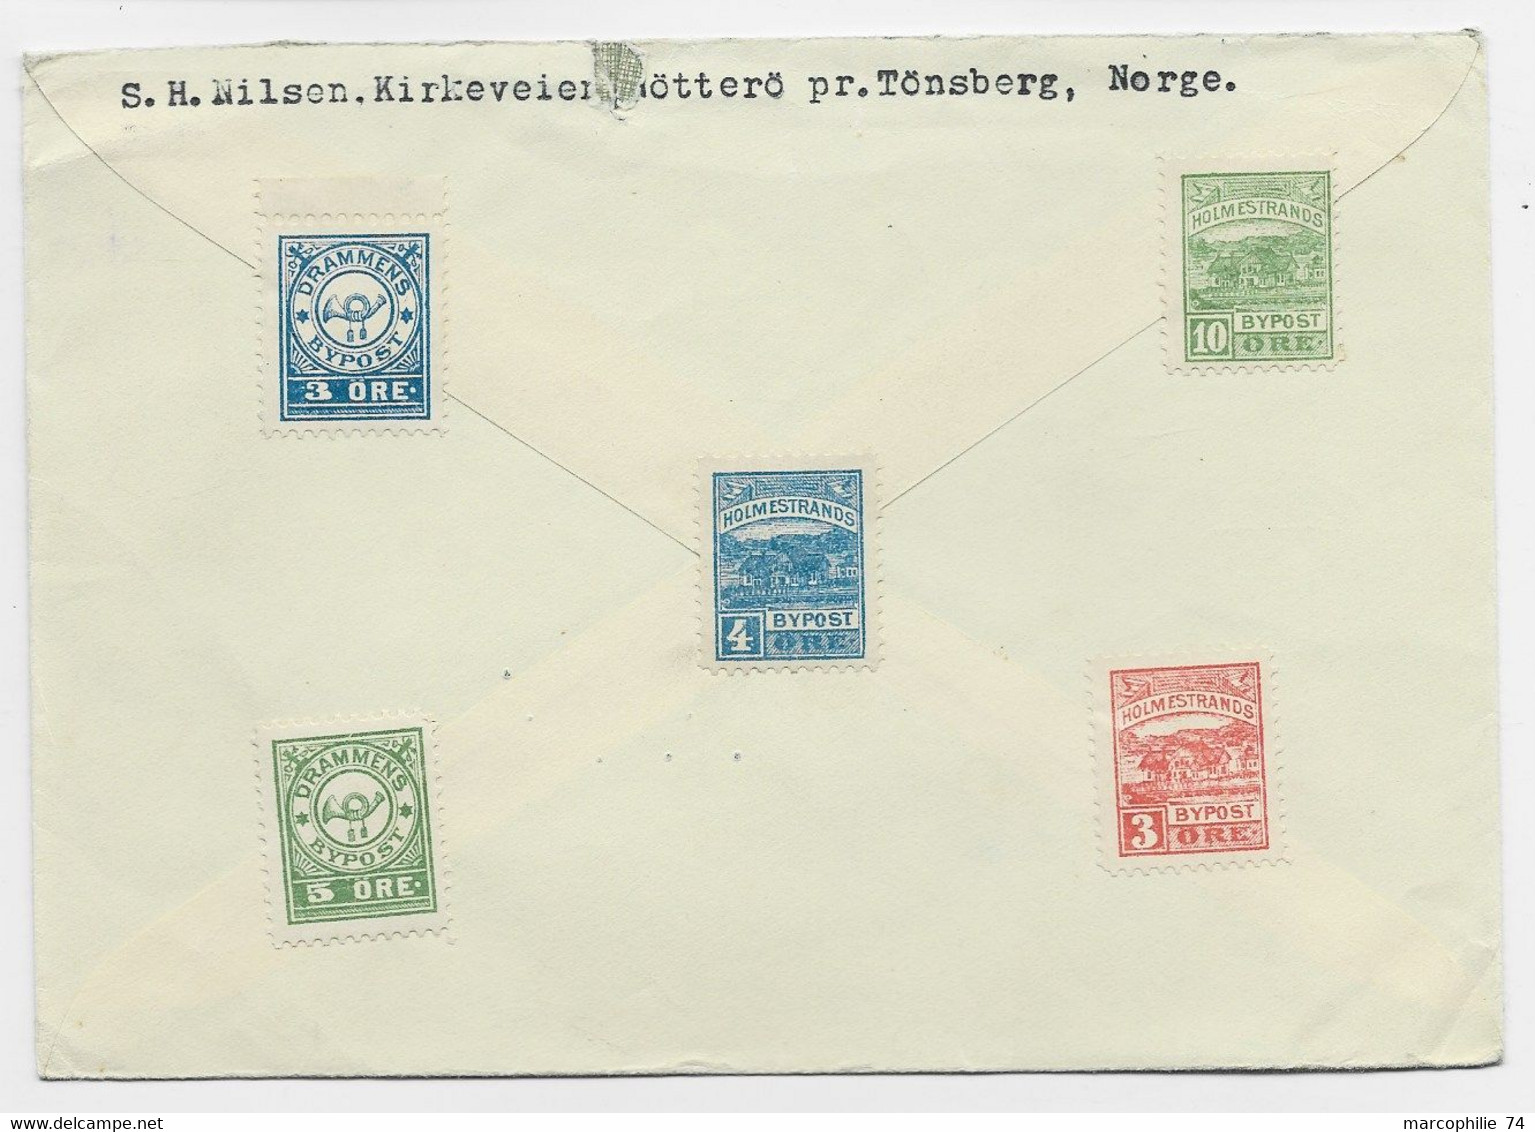 NORGE NORWAY LETTRE COVER TONSBERG 10.1.1955 TO USA - Briefe U. Dokumente